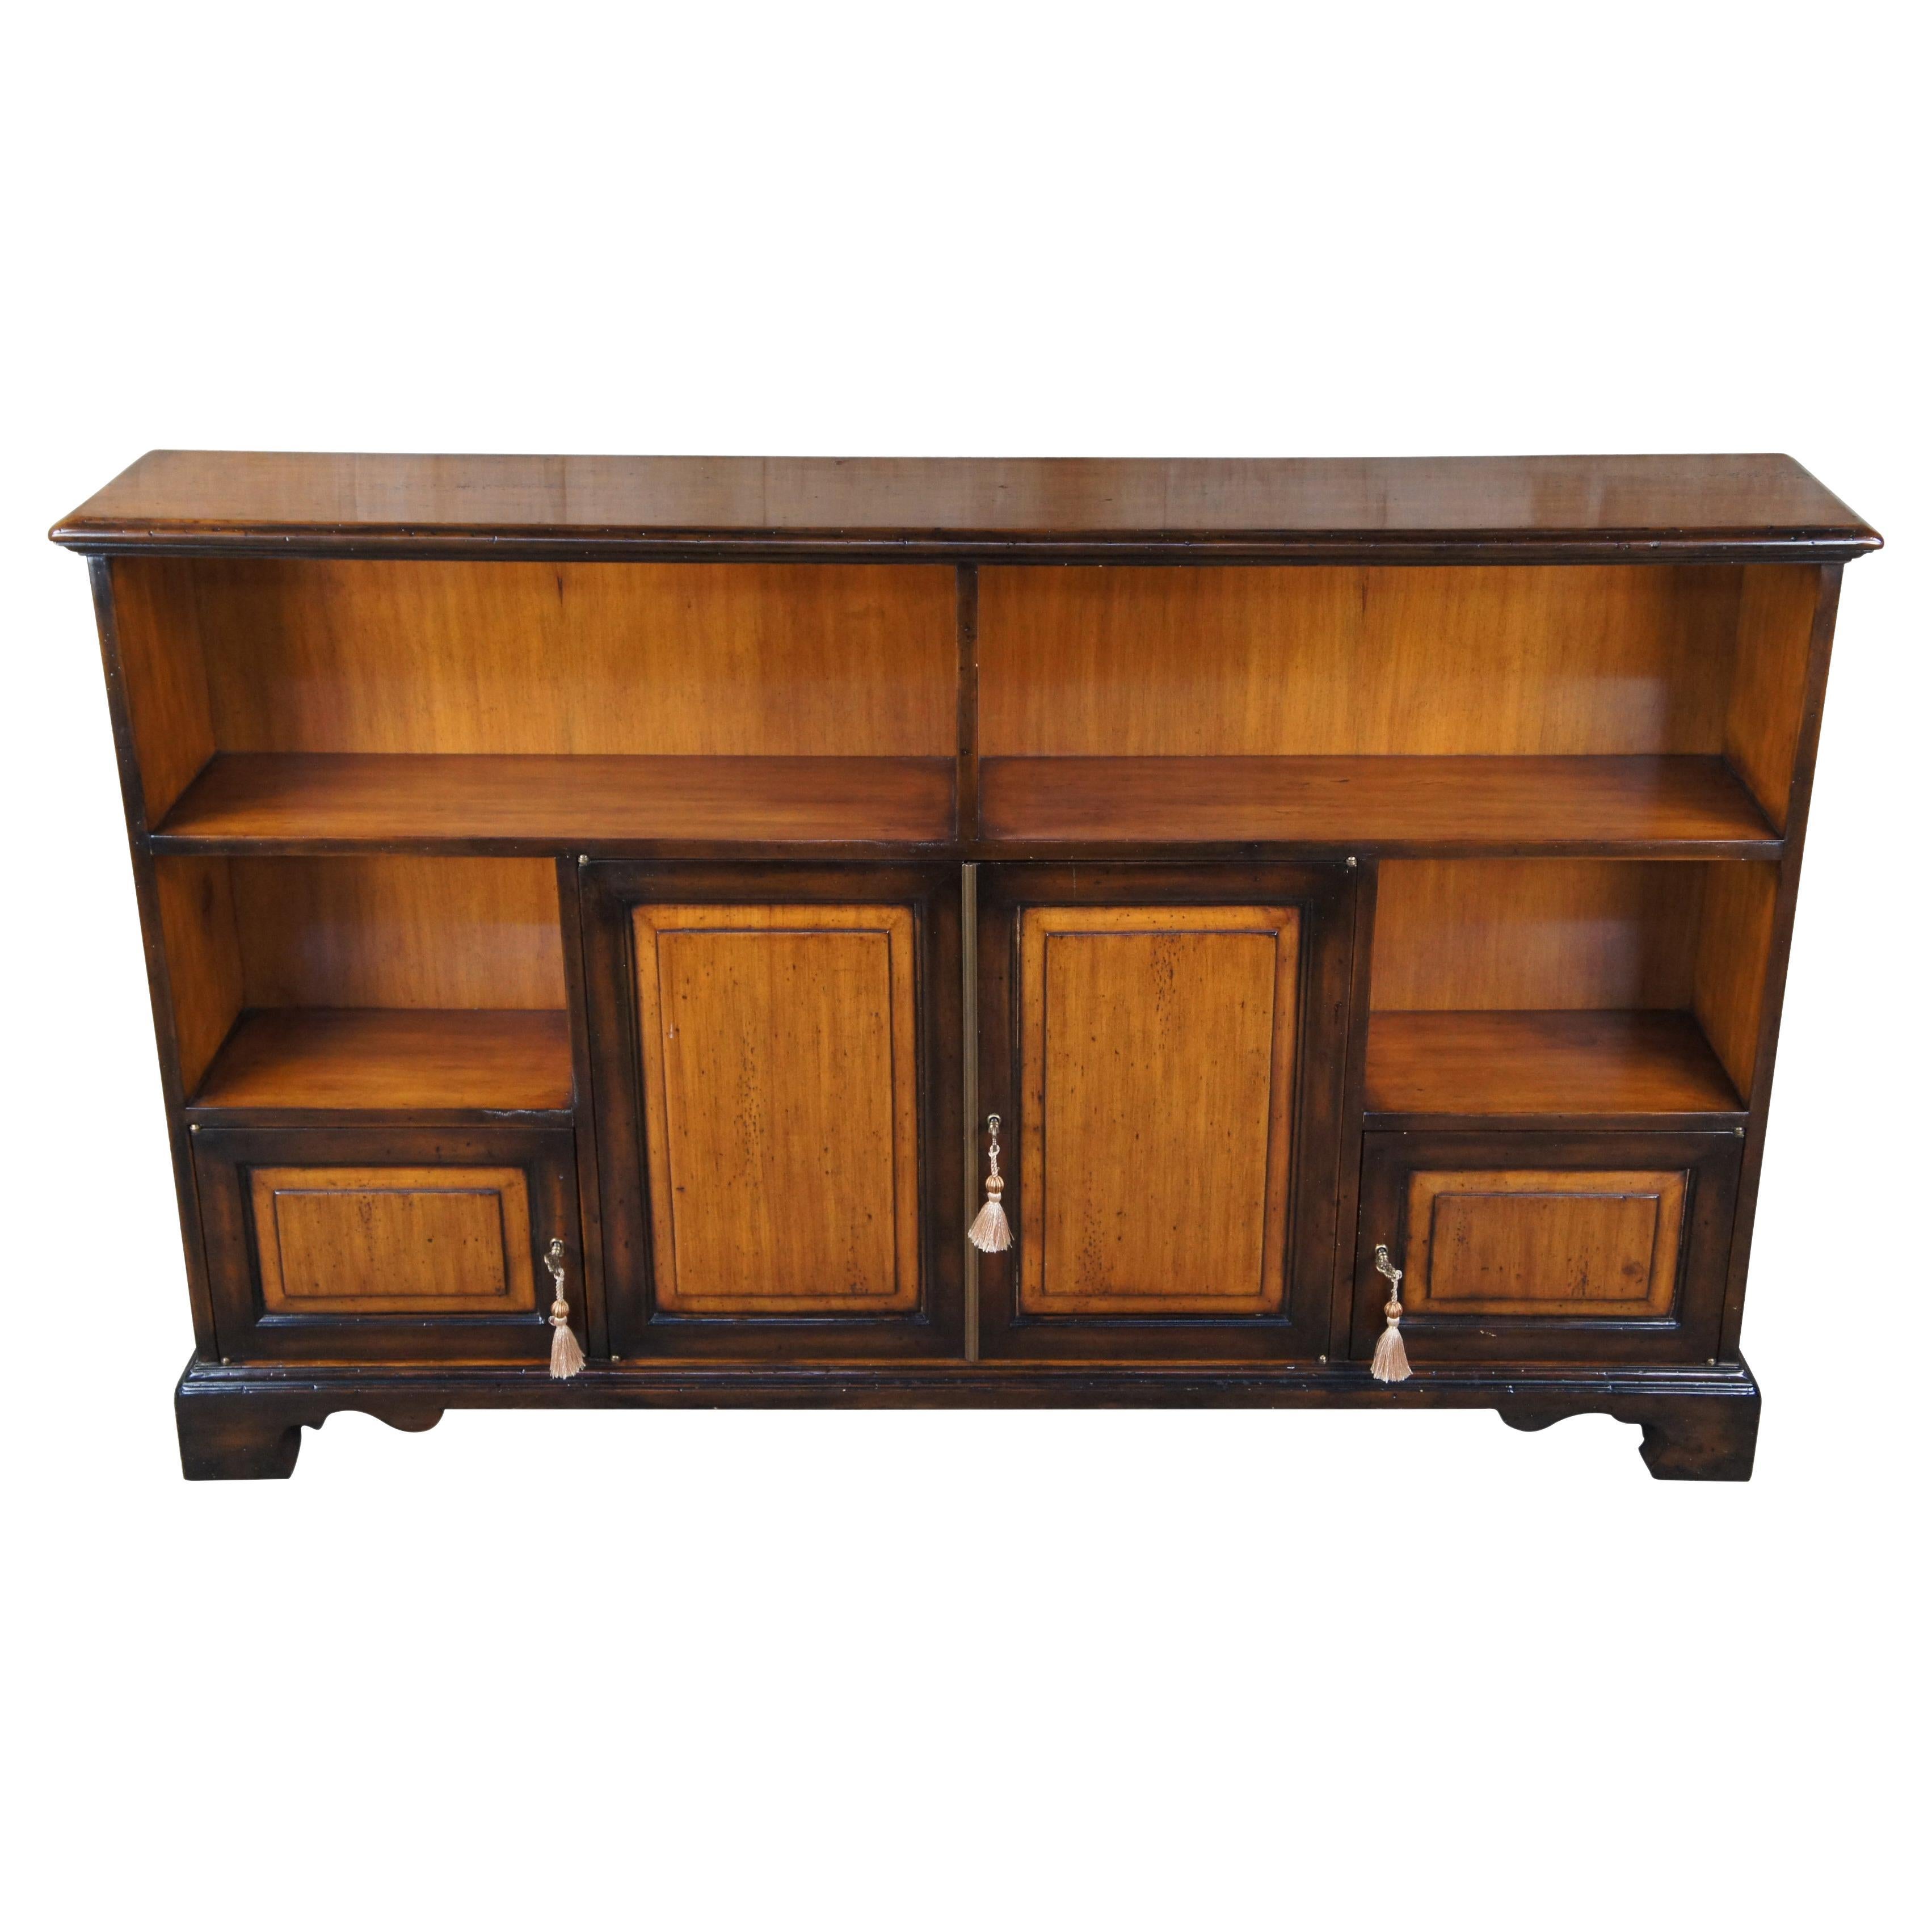 Theodore Alexander Chateau Du Vallois Console Sideboard Bookcase Cabinet